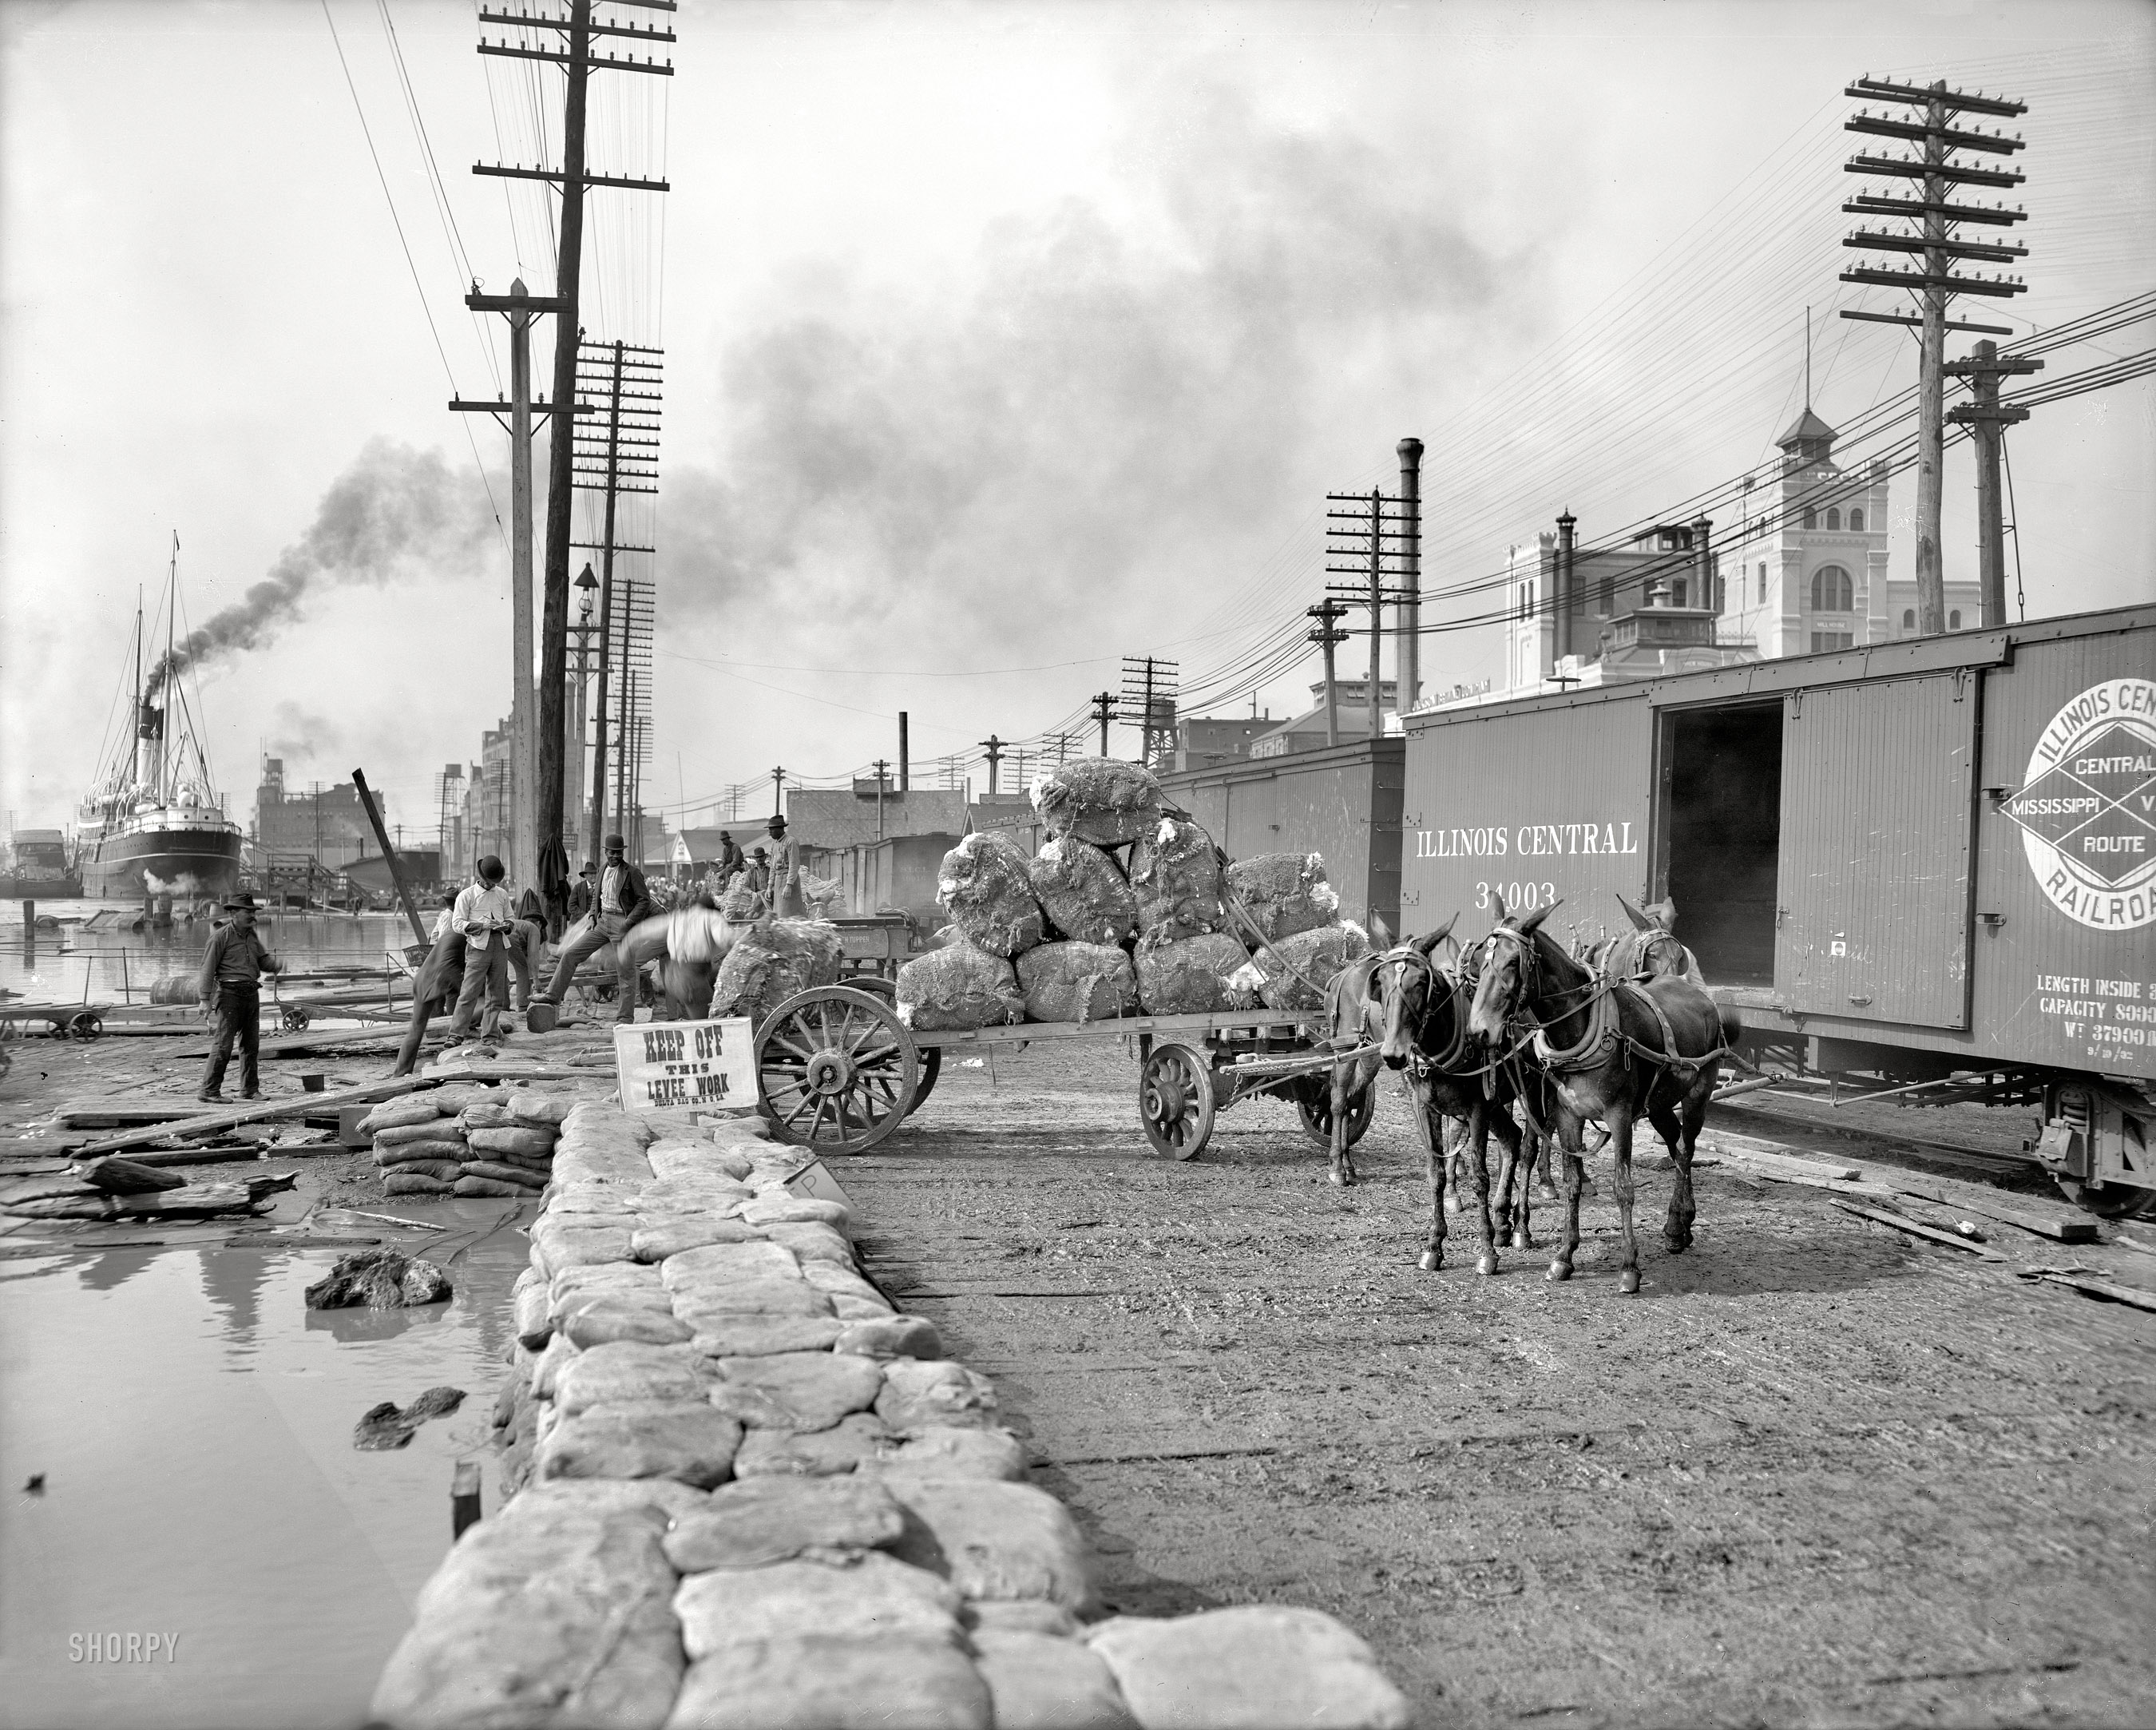 New Orleans circa 1903. "Mule teams and the levee." 8x10 inch dry plate glass negative, Detroit Publishing Company. View full size.